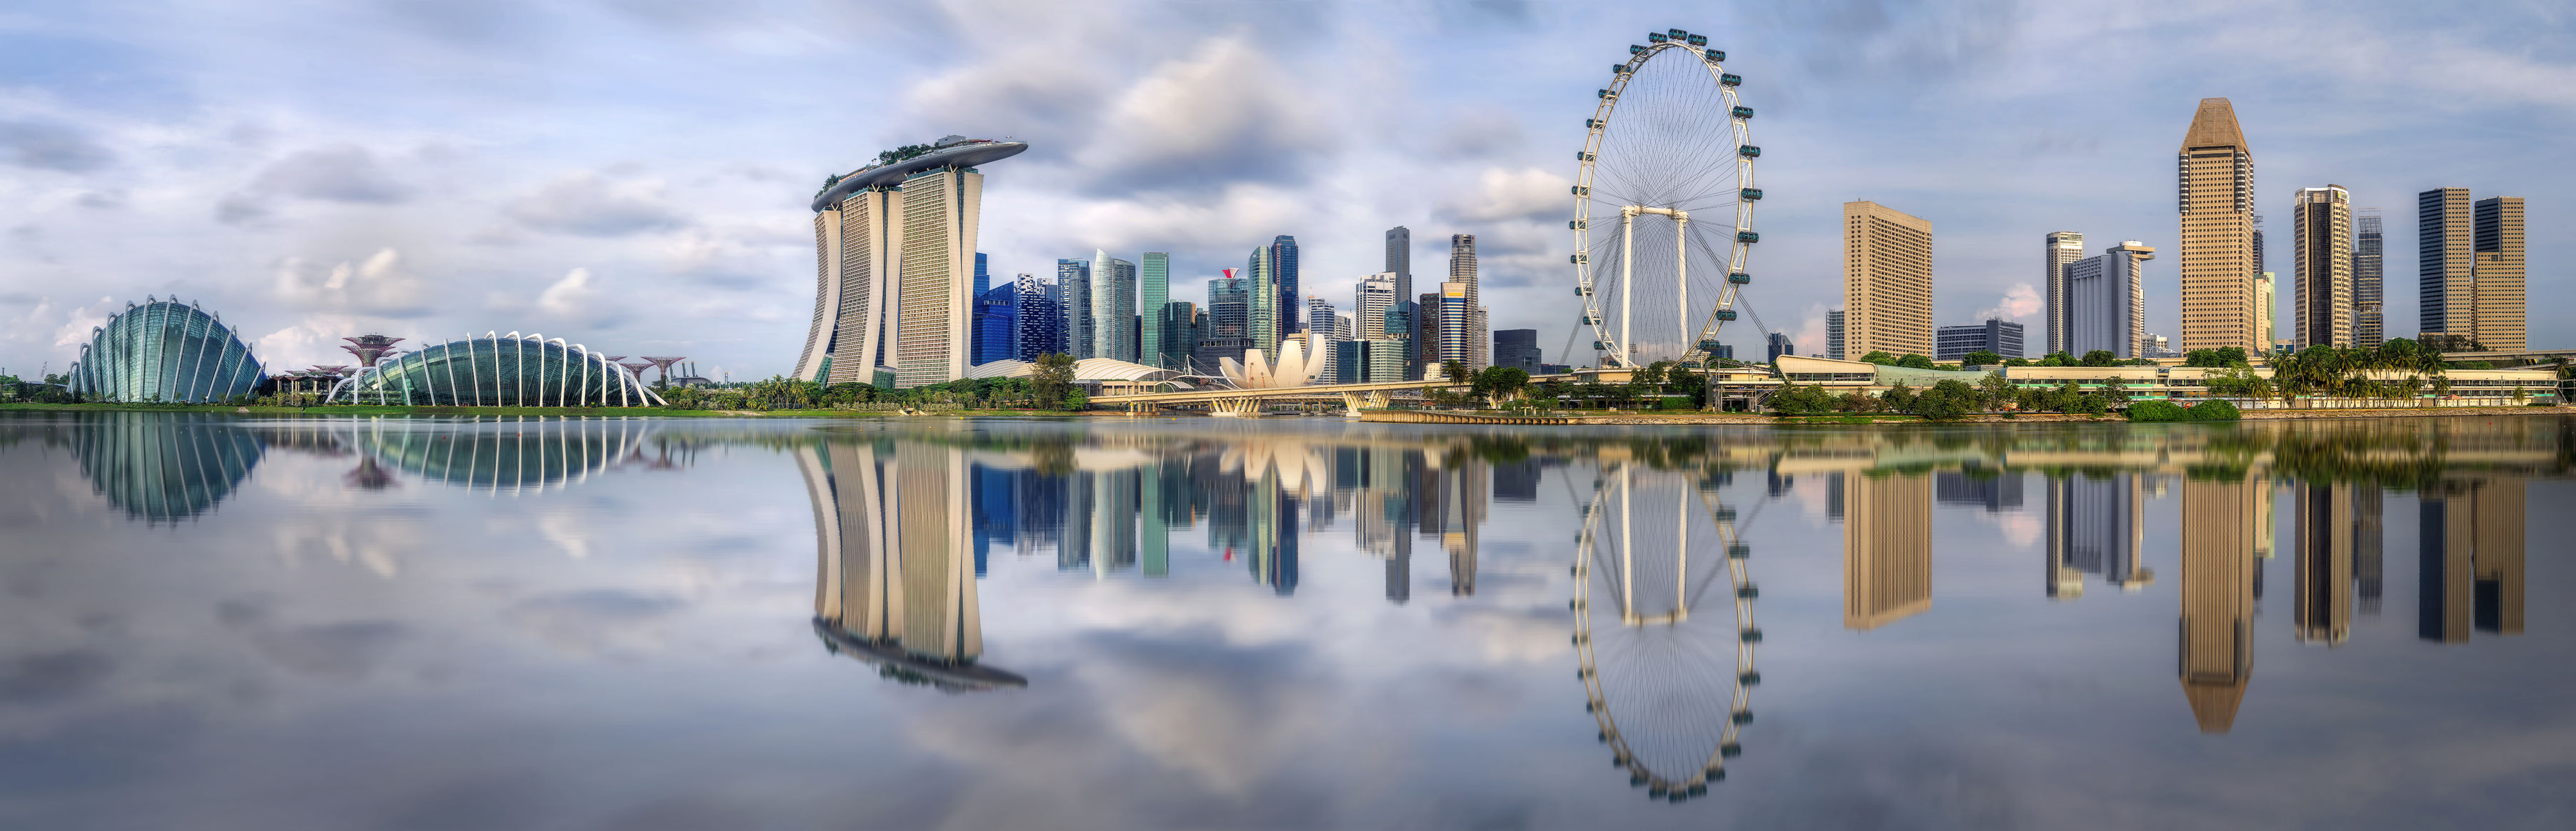 Singapore - Sustainable Finance In Aviation: What Does The Future Hold?